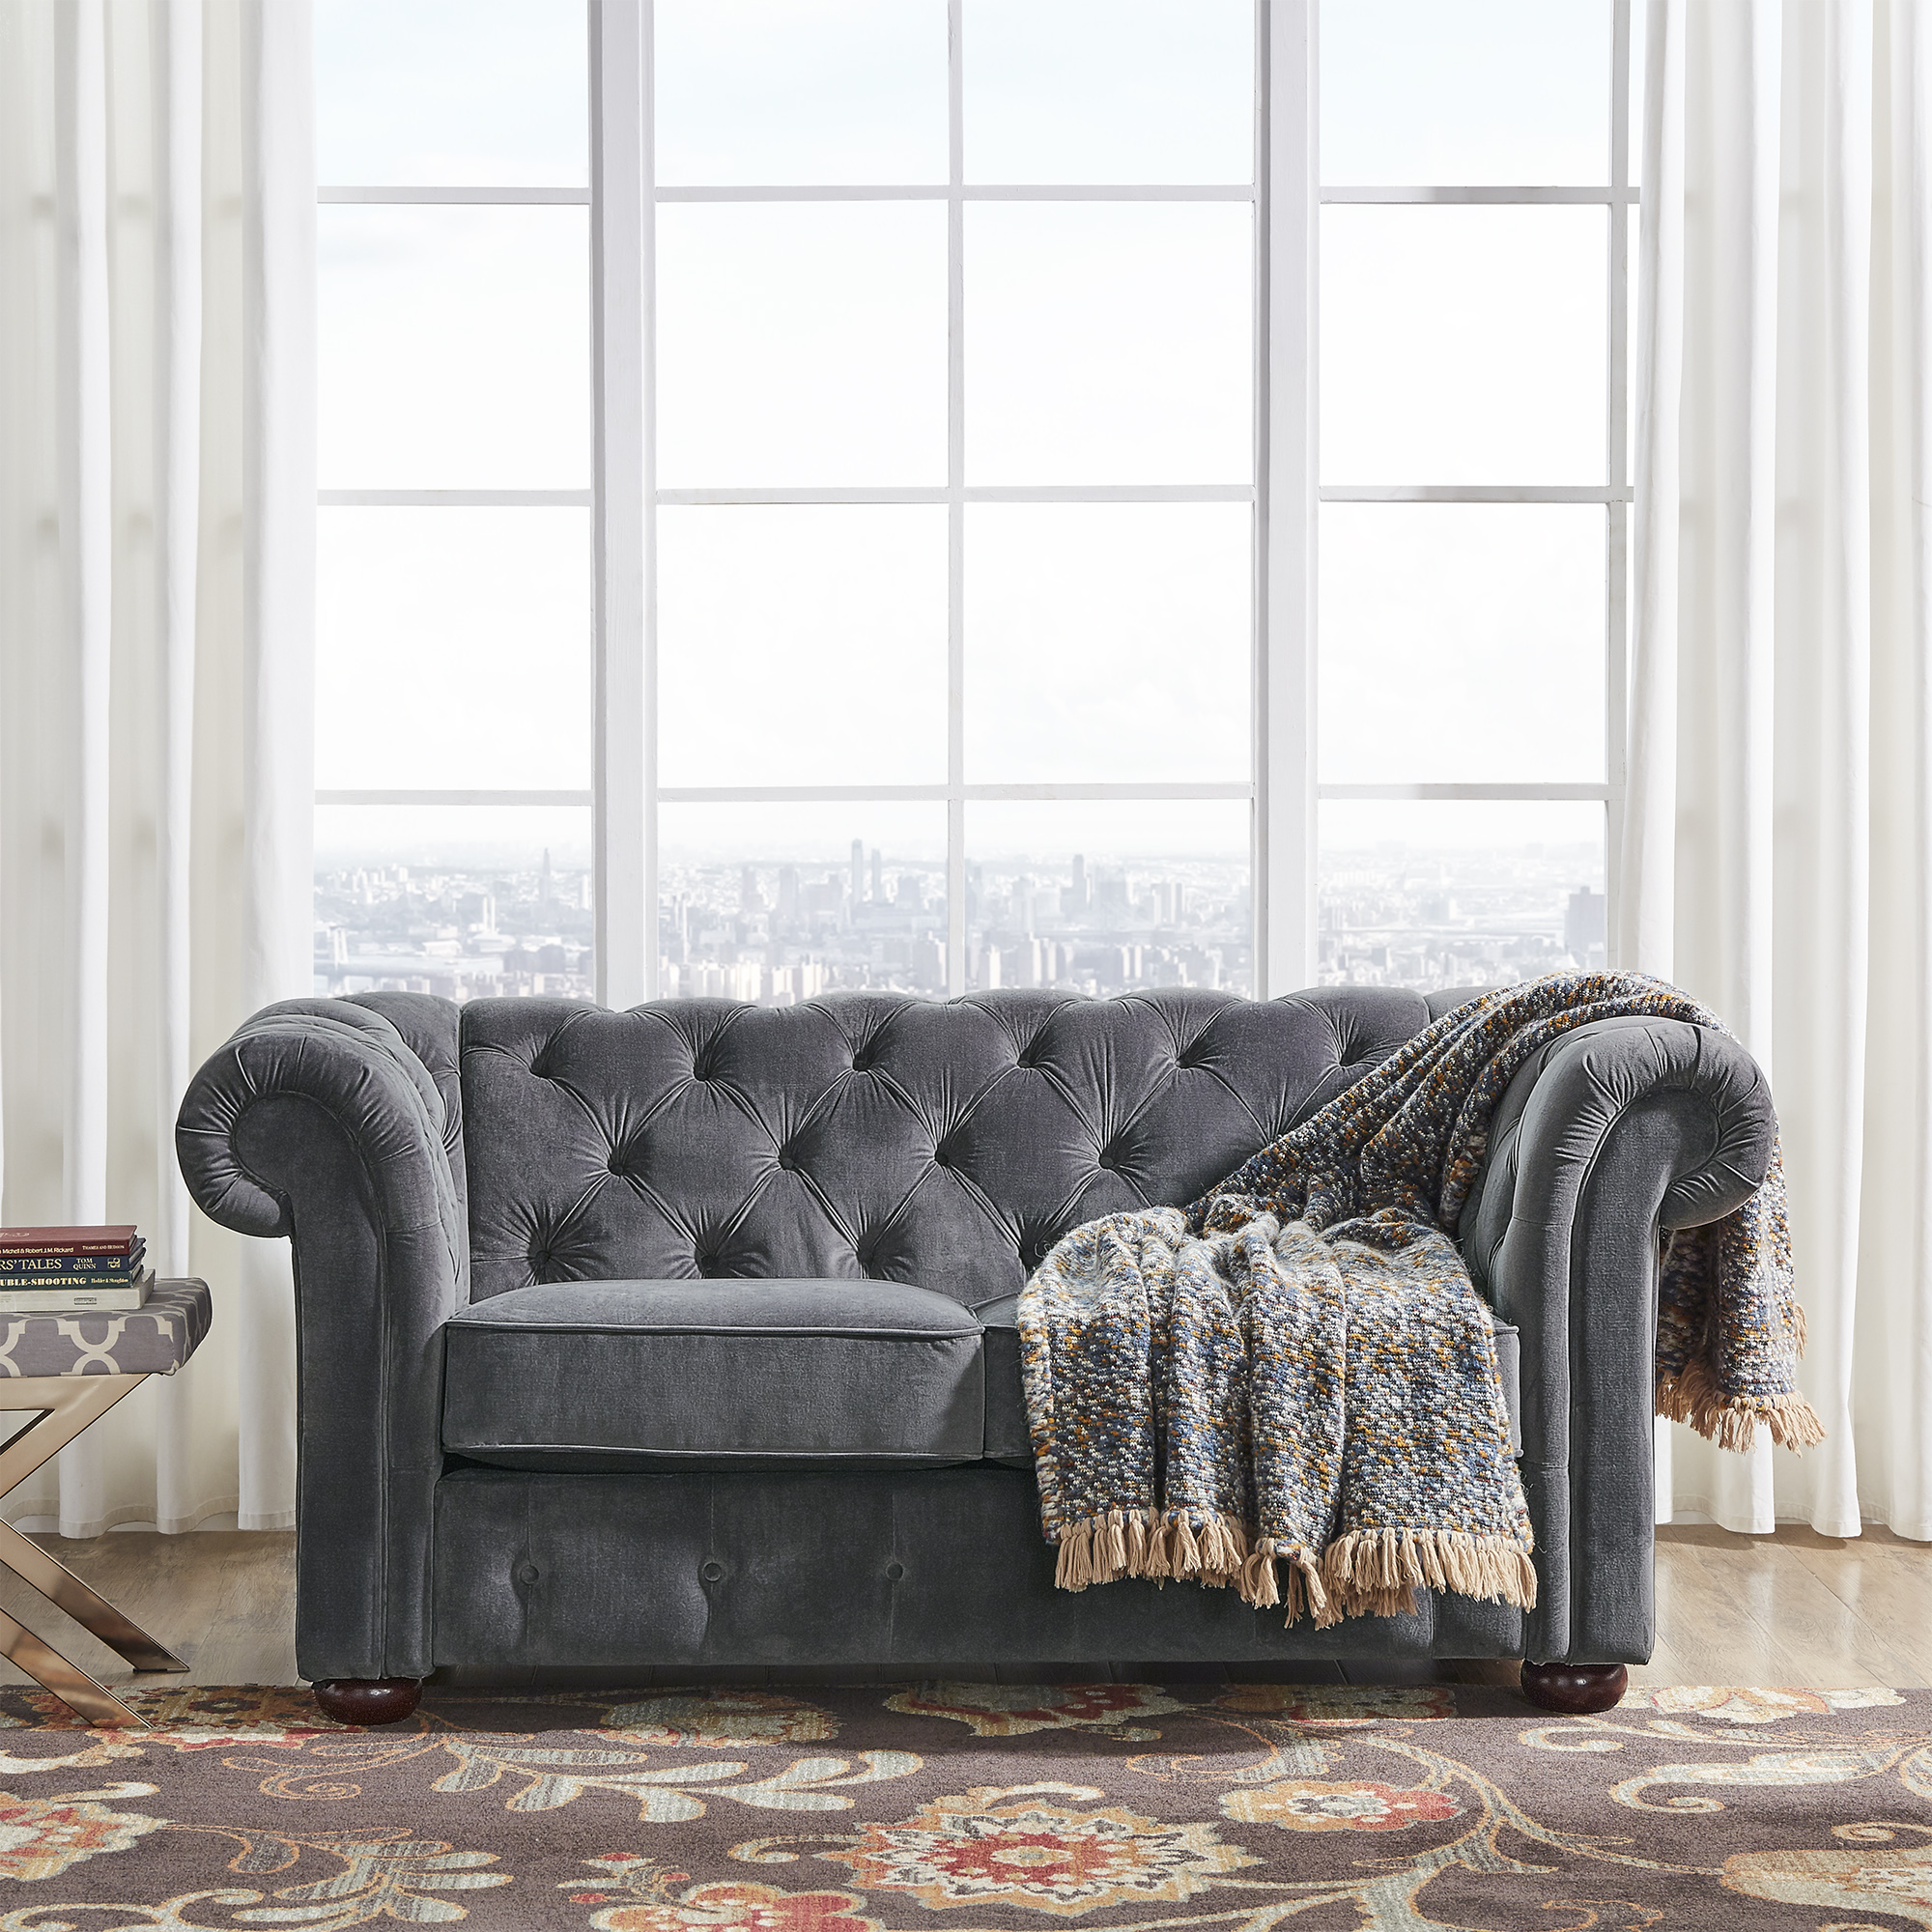 In this guide on how to buy furniture online, we wanted to show the different types of seating you could have in a living space. This image depicts the Dark Grey Velvet Chesterfield Loveseat from iNSPIRE Q Artisan.